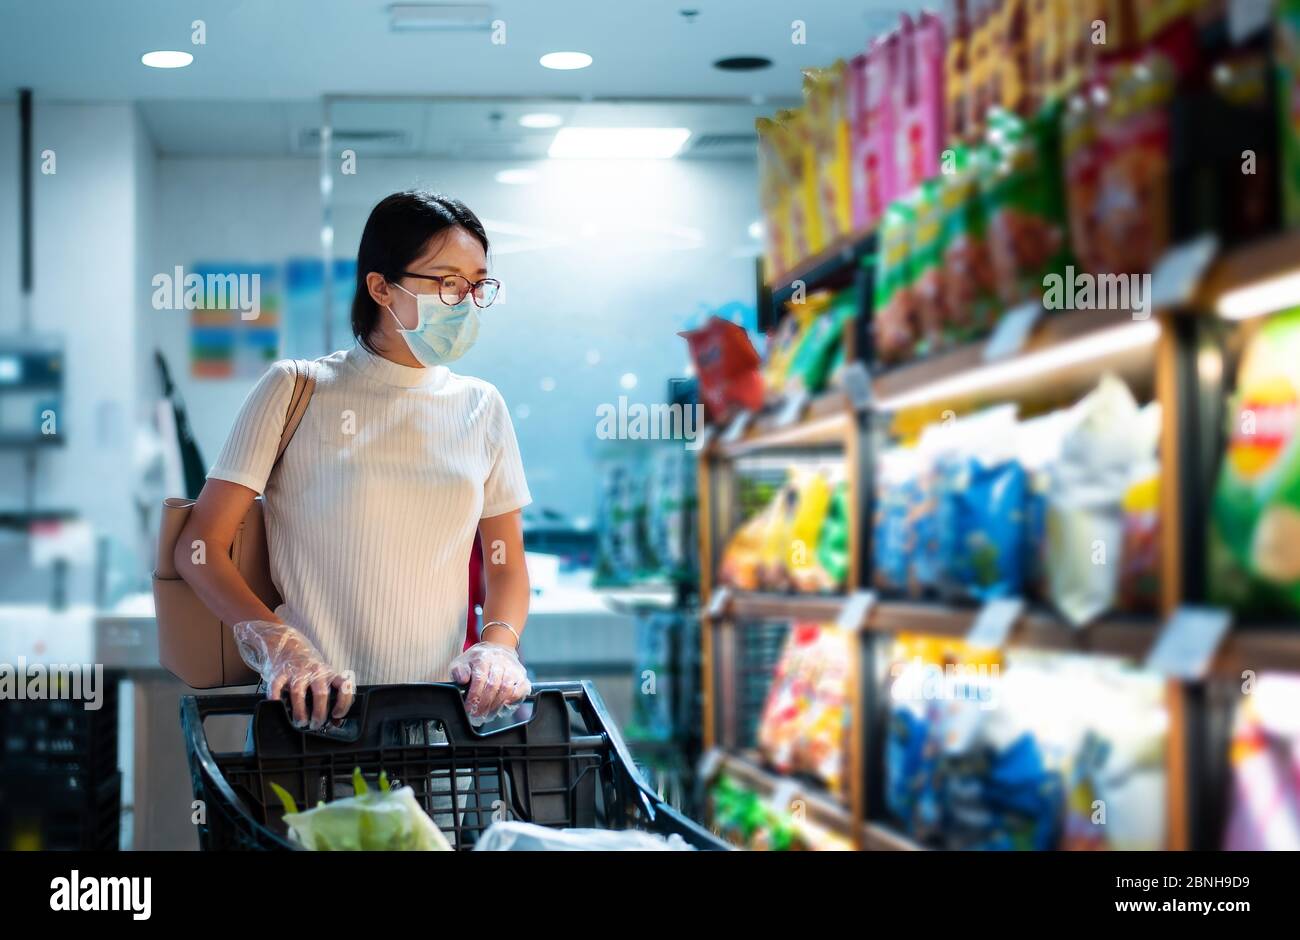 Asian woman shopping for groceries in the market wearing mask and gloves to prevent virius spread during coronavirus pandemic Stock Photo